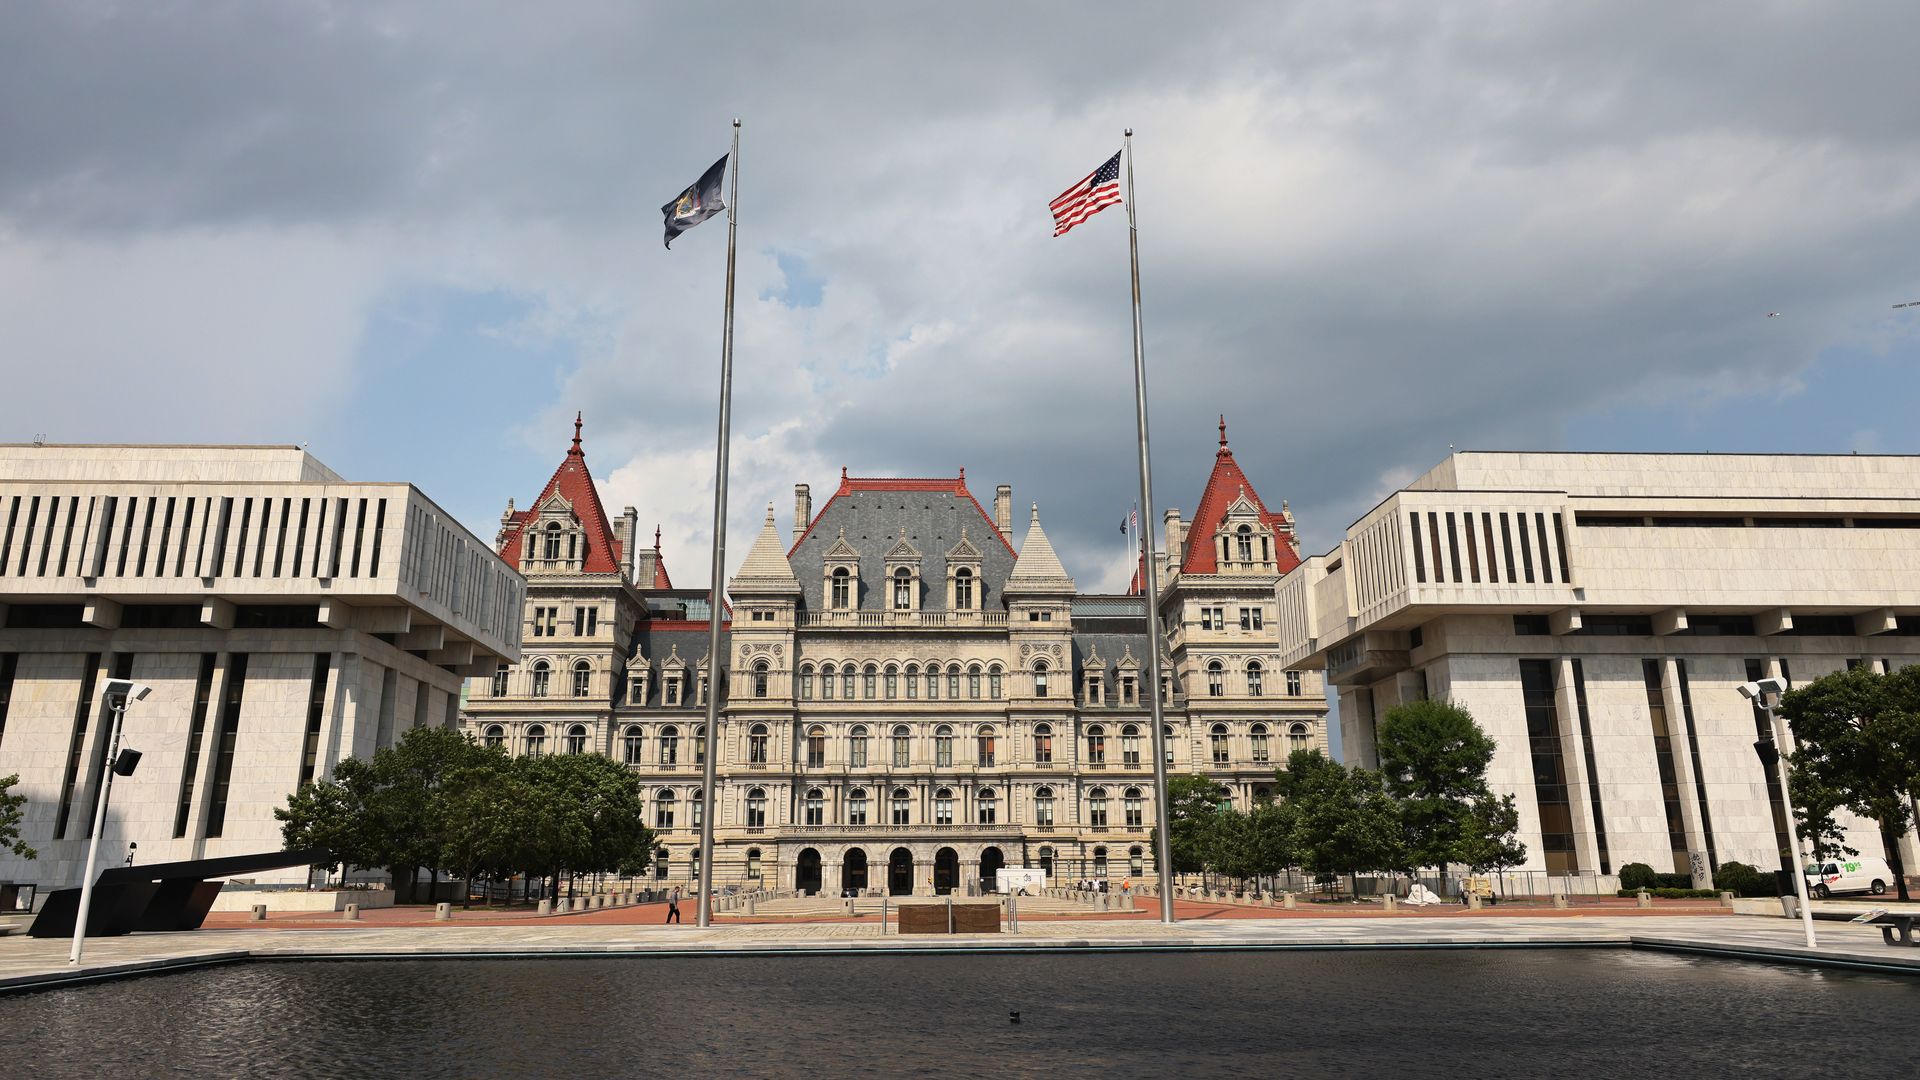 Photo of the New York state capitol building, with the American and New York flags flying in front